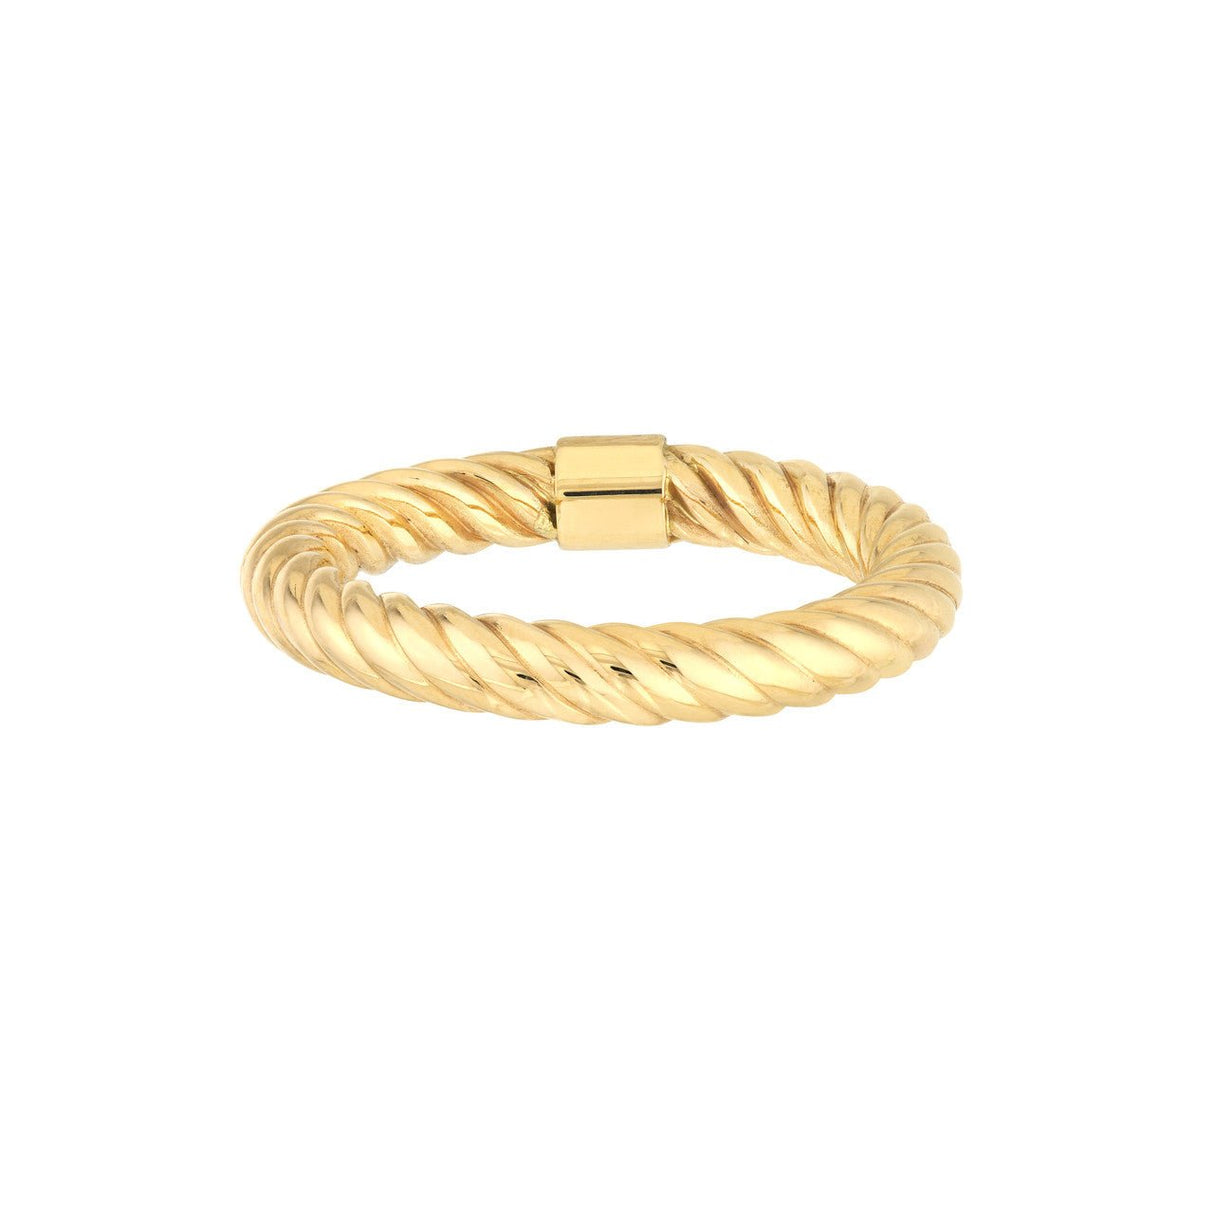 This photograph offers a real-life glimpse of the Twisted Rope Tube Ring comfortably worn on a hand. Its stylish appeal is even more remarkable in this setting, demonstrating how effortlessly it complements different styles. The twisted rope design, meticulously crafted, and the glowing gold create an attractive play of light and shadow, diamond origin,